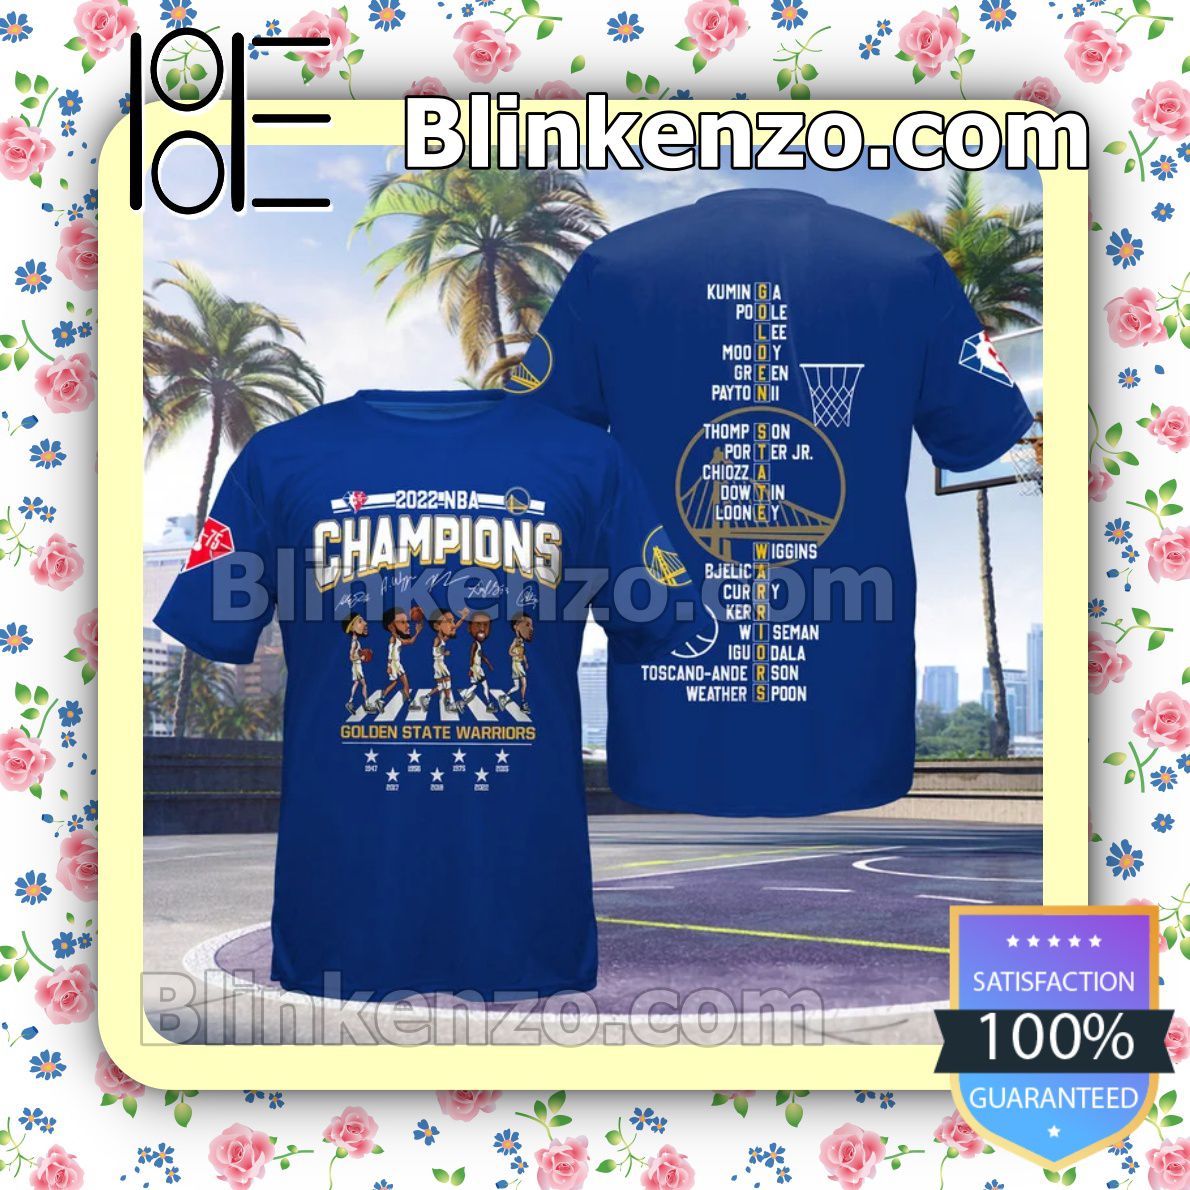 2022 Nba Champions Golden State Warriors Abbey Road Signatures Hoodies, Long Sleeve Shirt